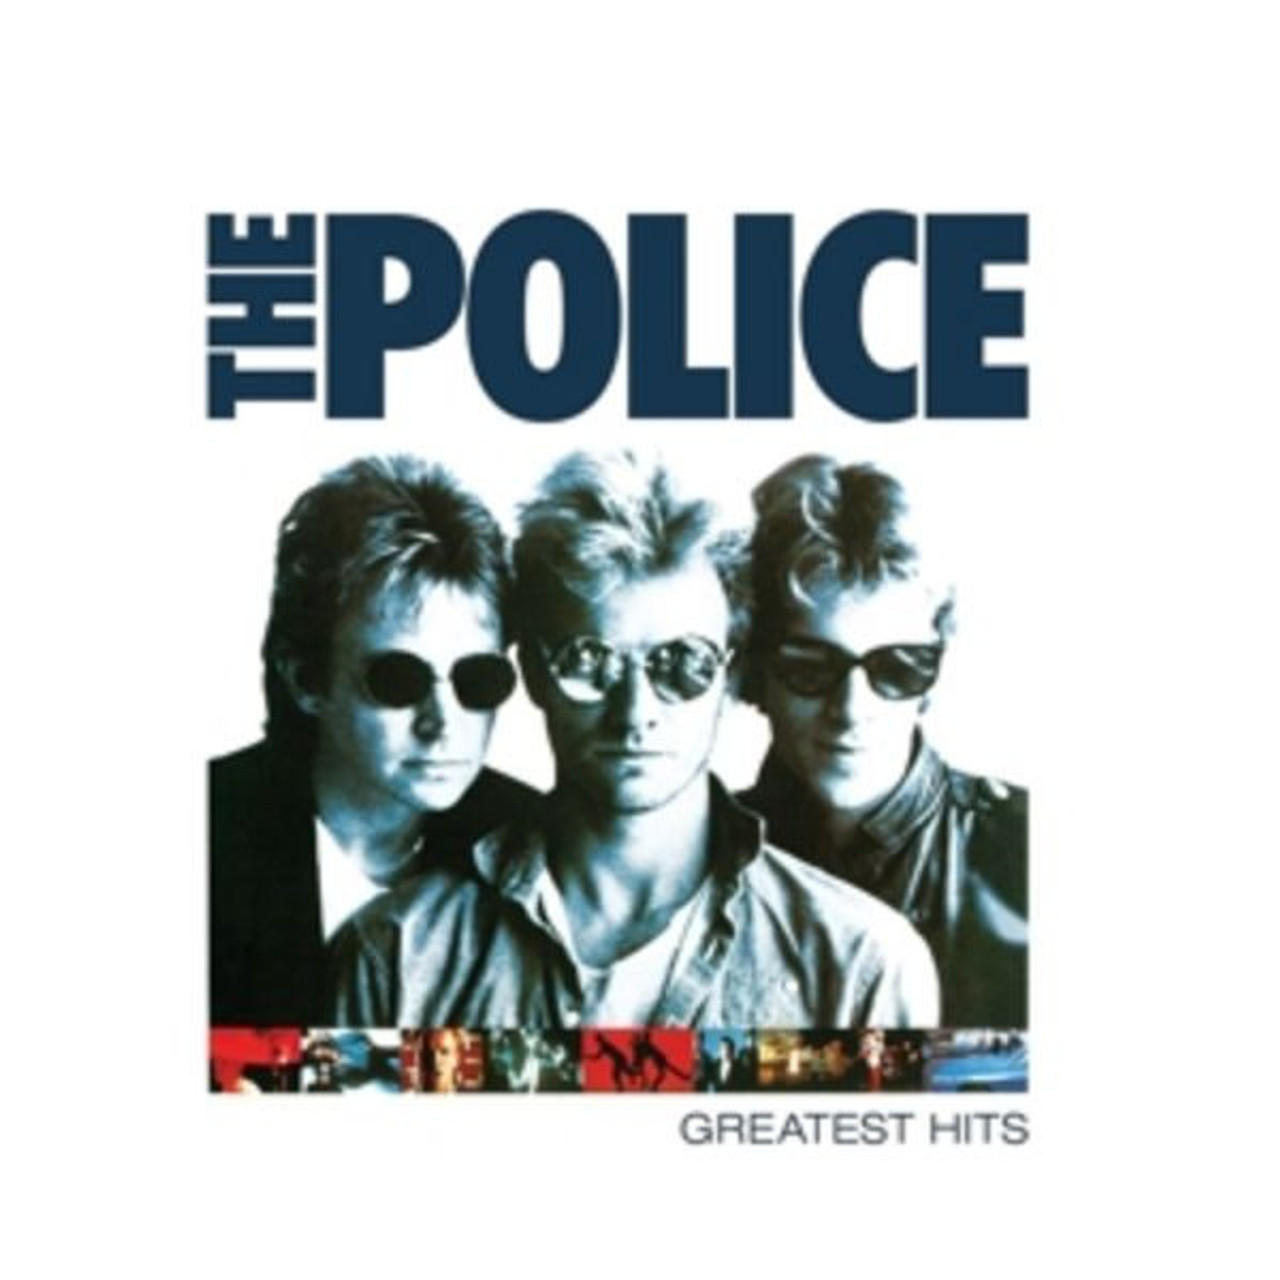 LP POLICE - GREATEST HITS